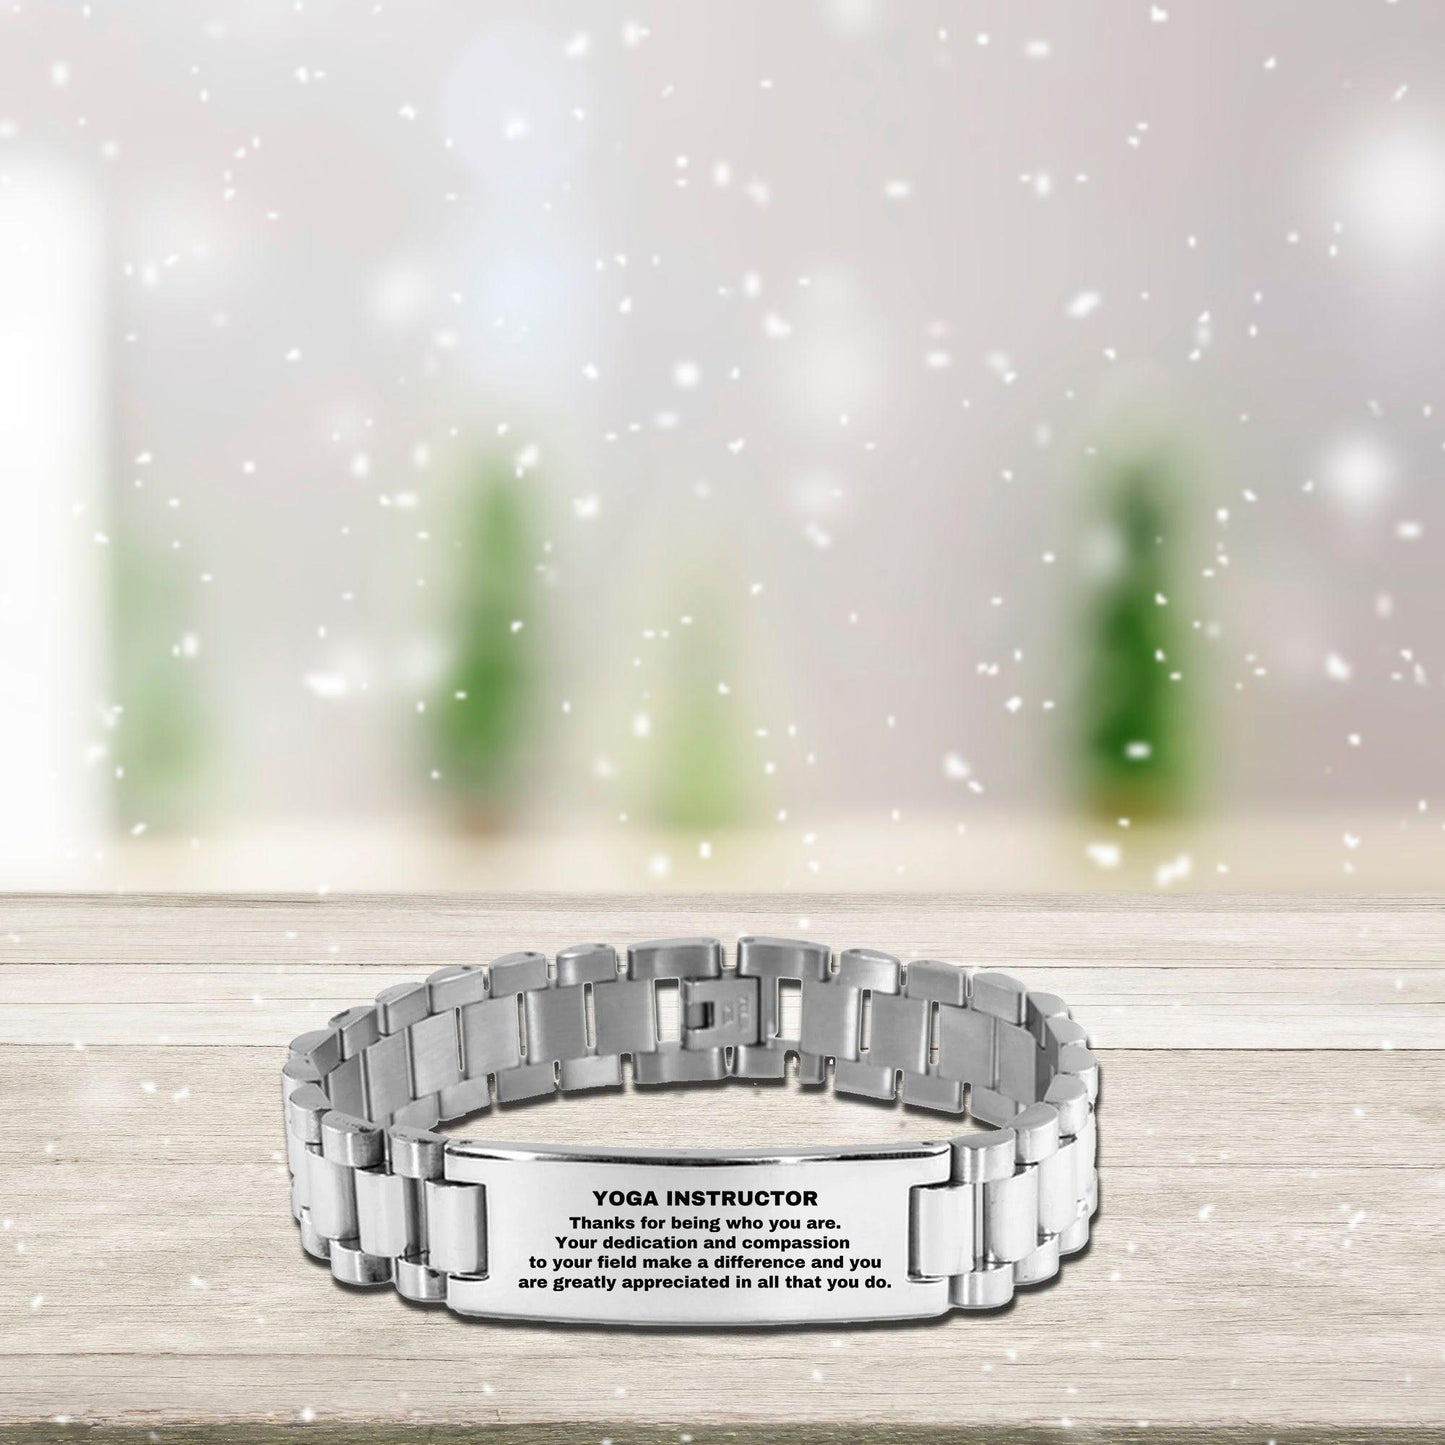 Yoga Instructor Ladder Stainless Steel Engraved Bracelet - Thanks for being who you are - Birthday Christmas Jewelry Gifts Coworkers Colleague Boss - Mallard Moon Gift Shop